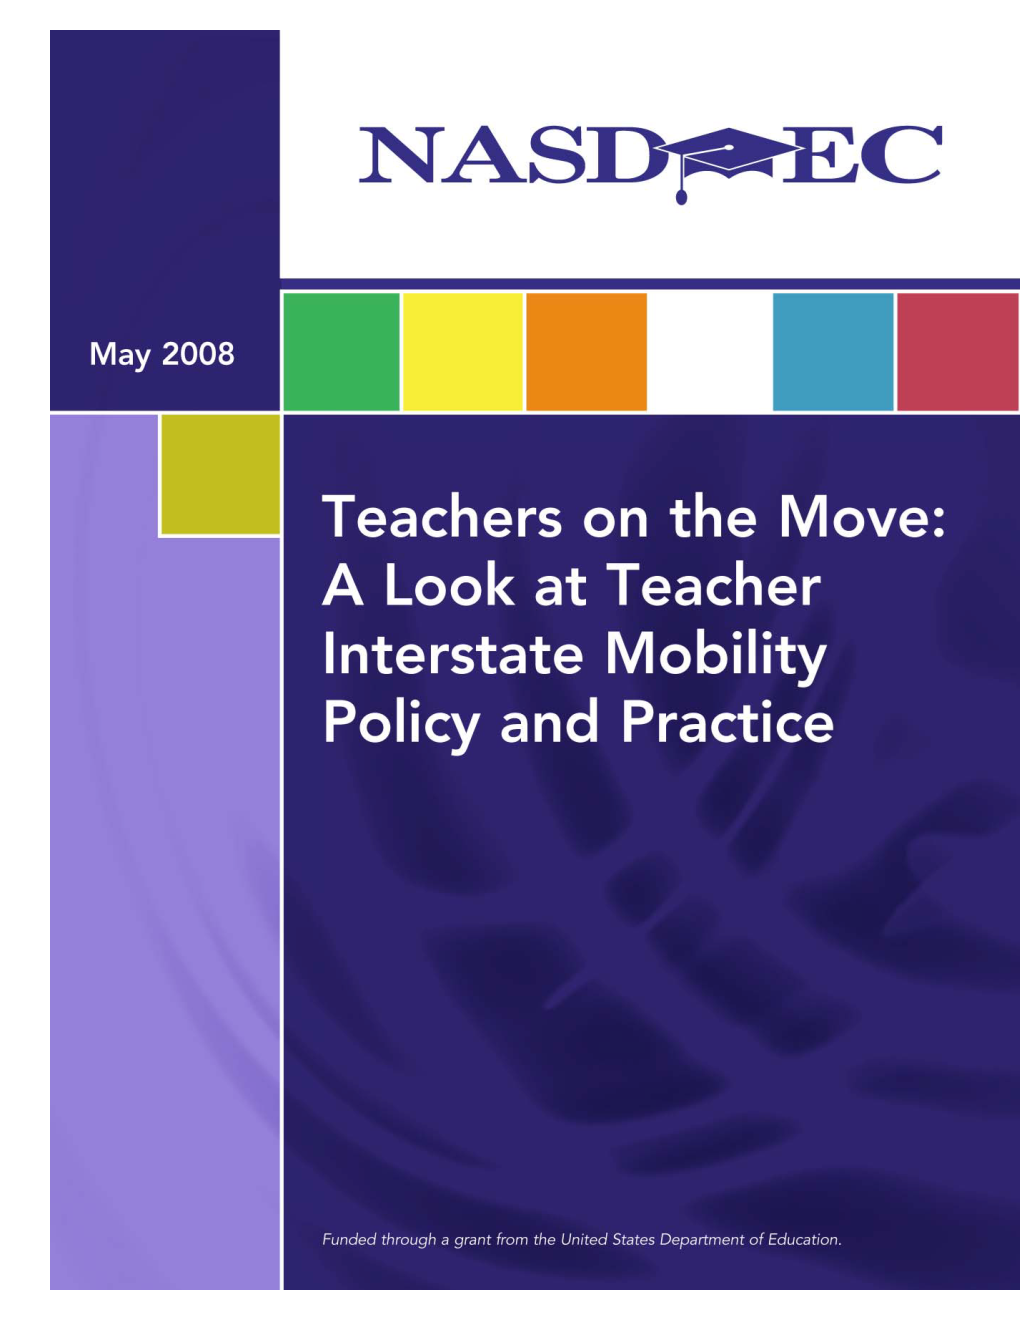 Teachers on the Move: a Look at Teacher Interstate Mobility Policy and Practice